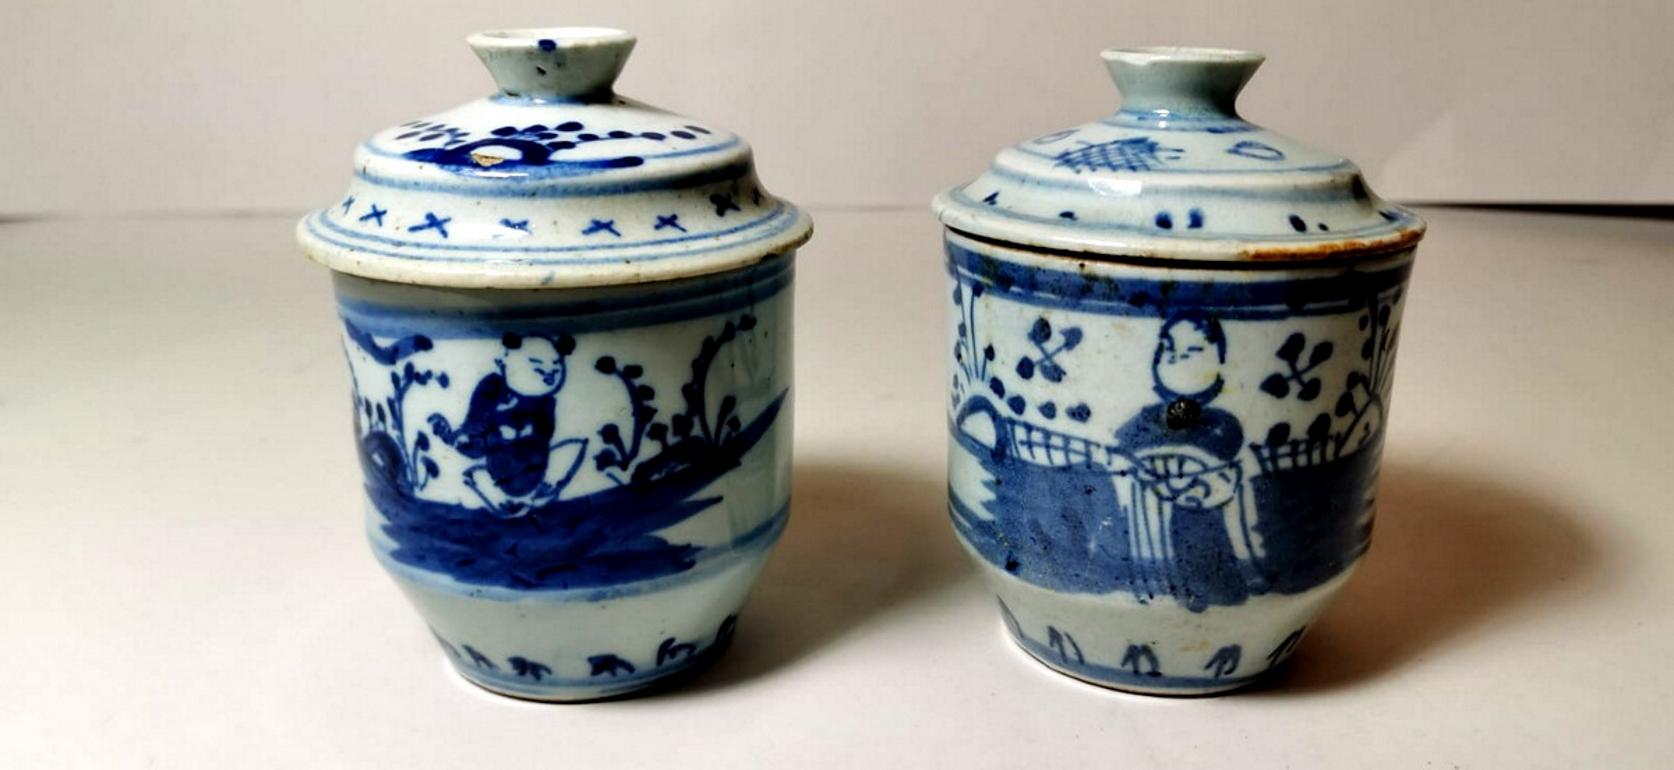 We kindly suggest you read the whole description, because with it we try to give you detailed technical and historical information to guarantee the authenticity of our objects.
Ancient and rare Chinese ginger jars with lids; are hand-painted in